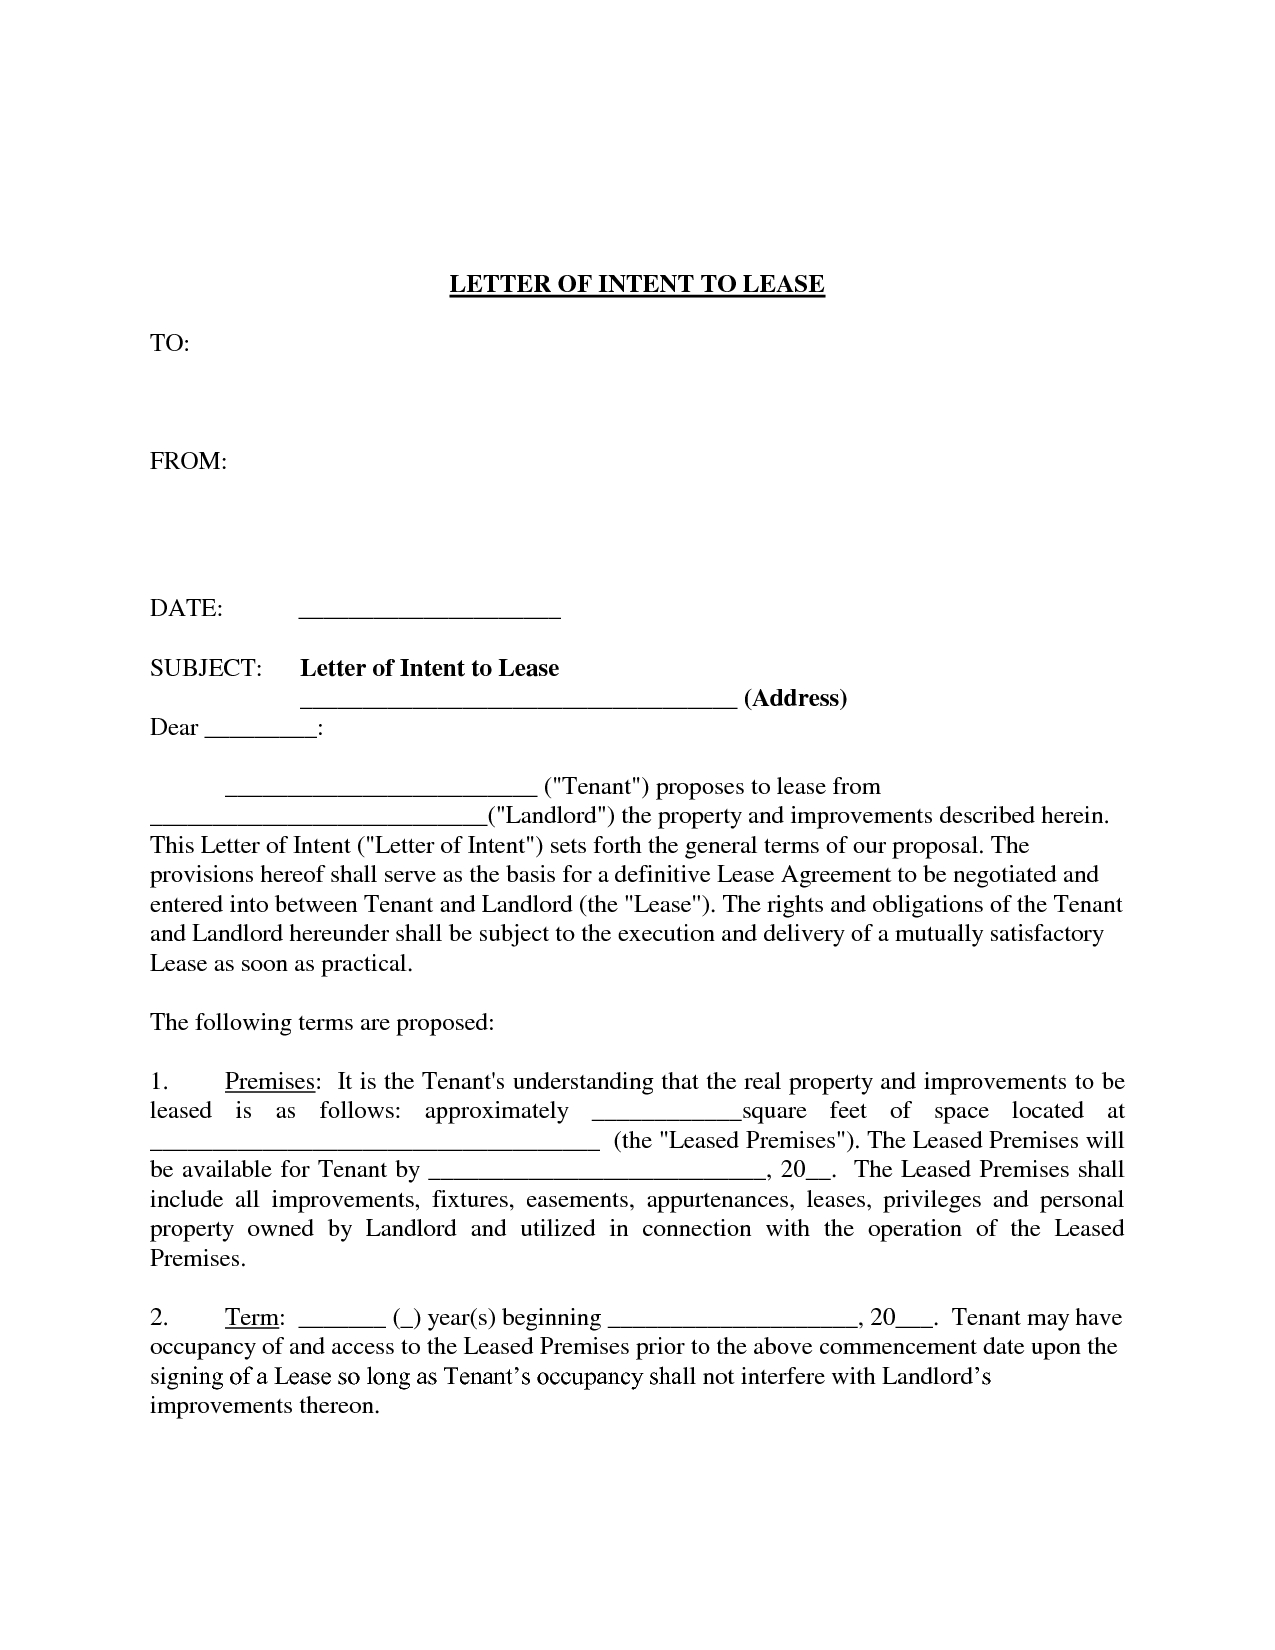 Free Letter Of Intent to Lease Commercial Space Template - Letter Intent format Gplusnick Yvsutt0s Merciale Sample